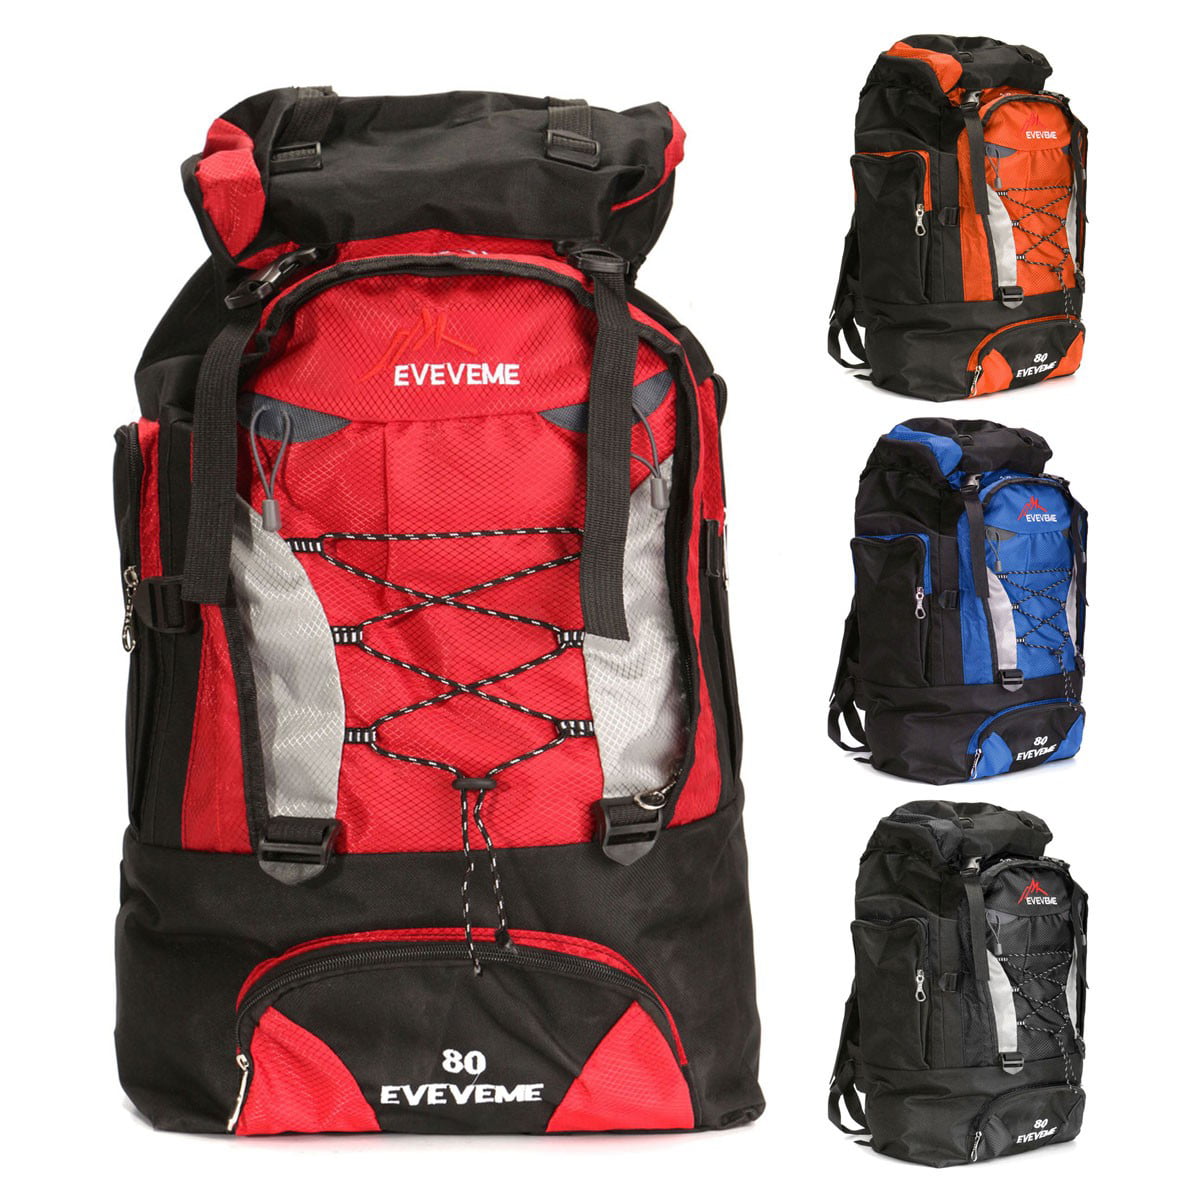 Details about   Travel Hiking Backpack Waterproof Outdoor Sport Camping Daypack Rucksack Bag Ce 